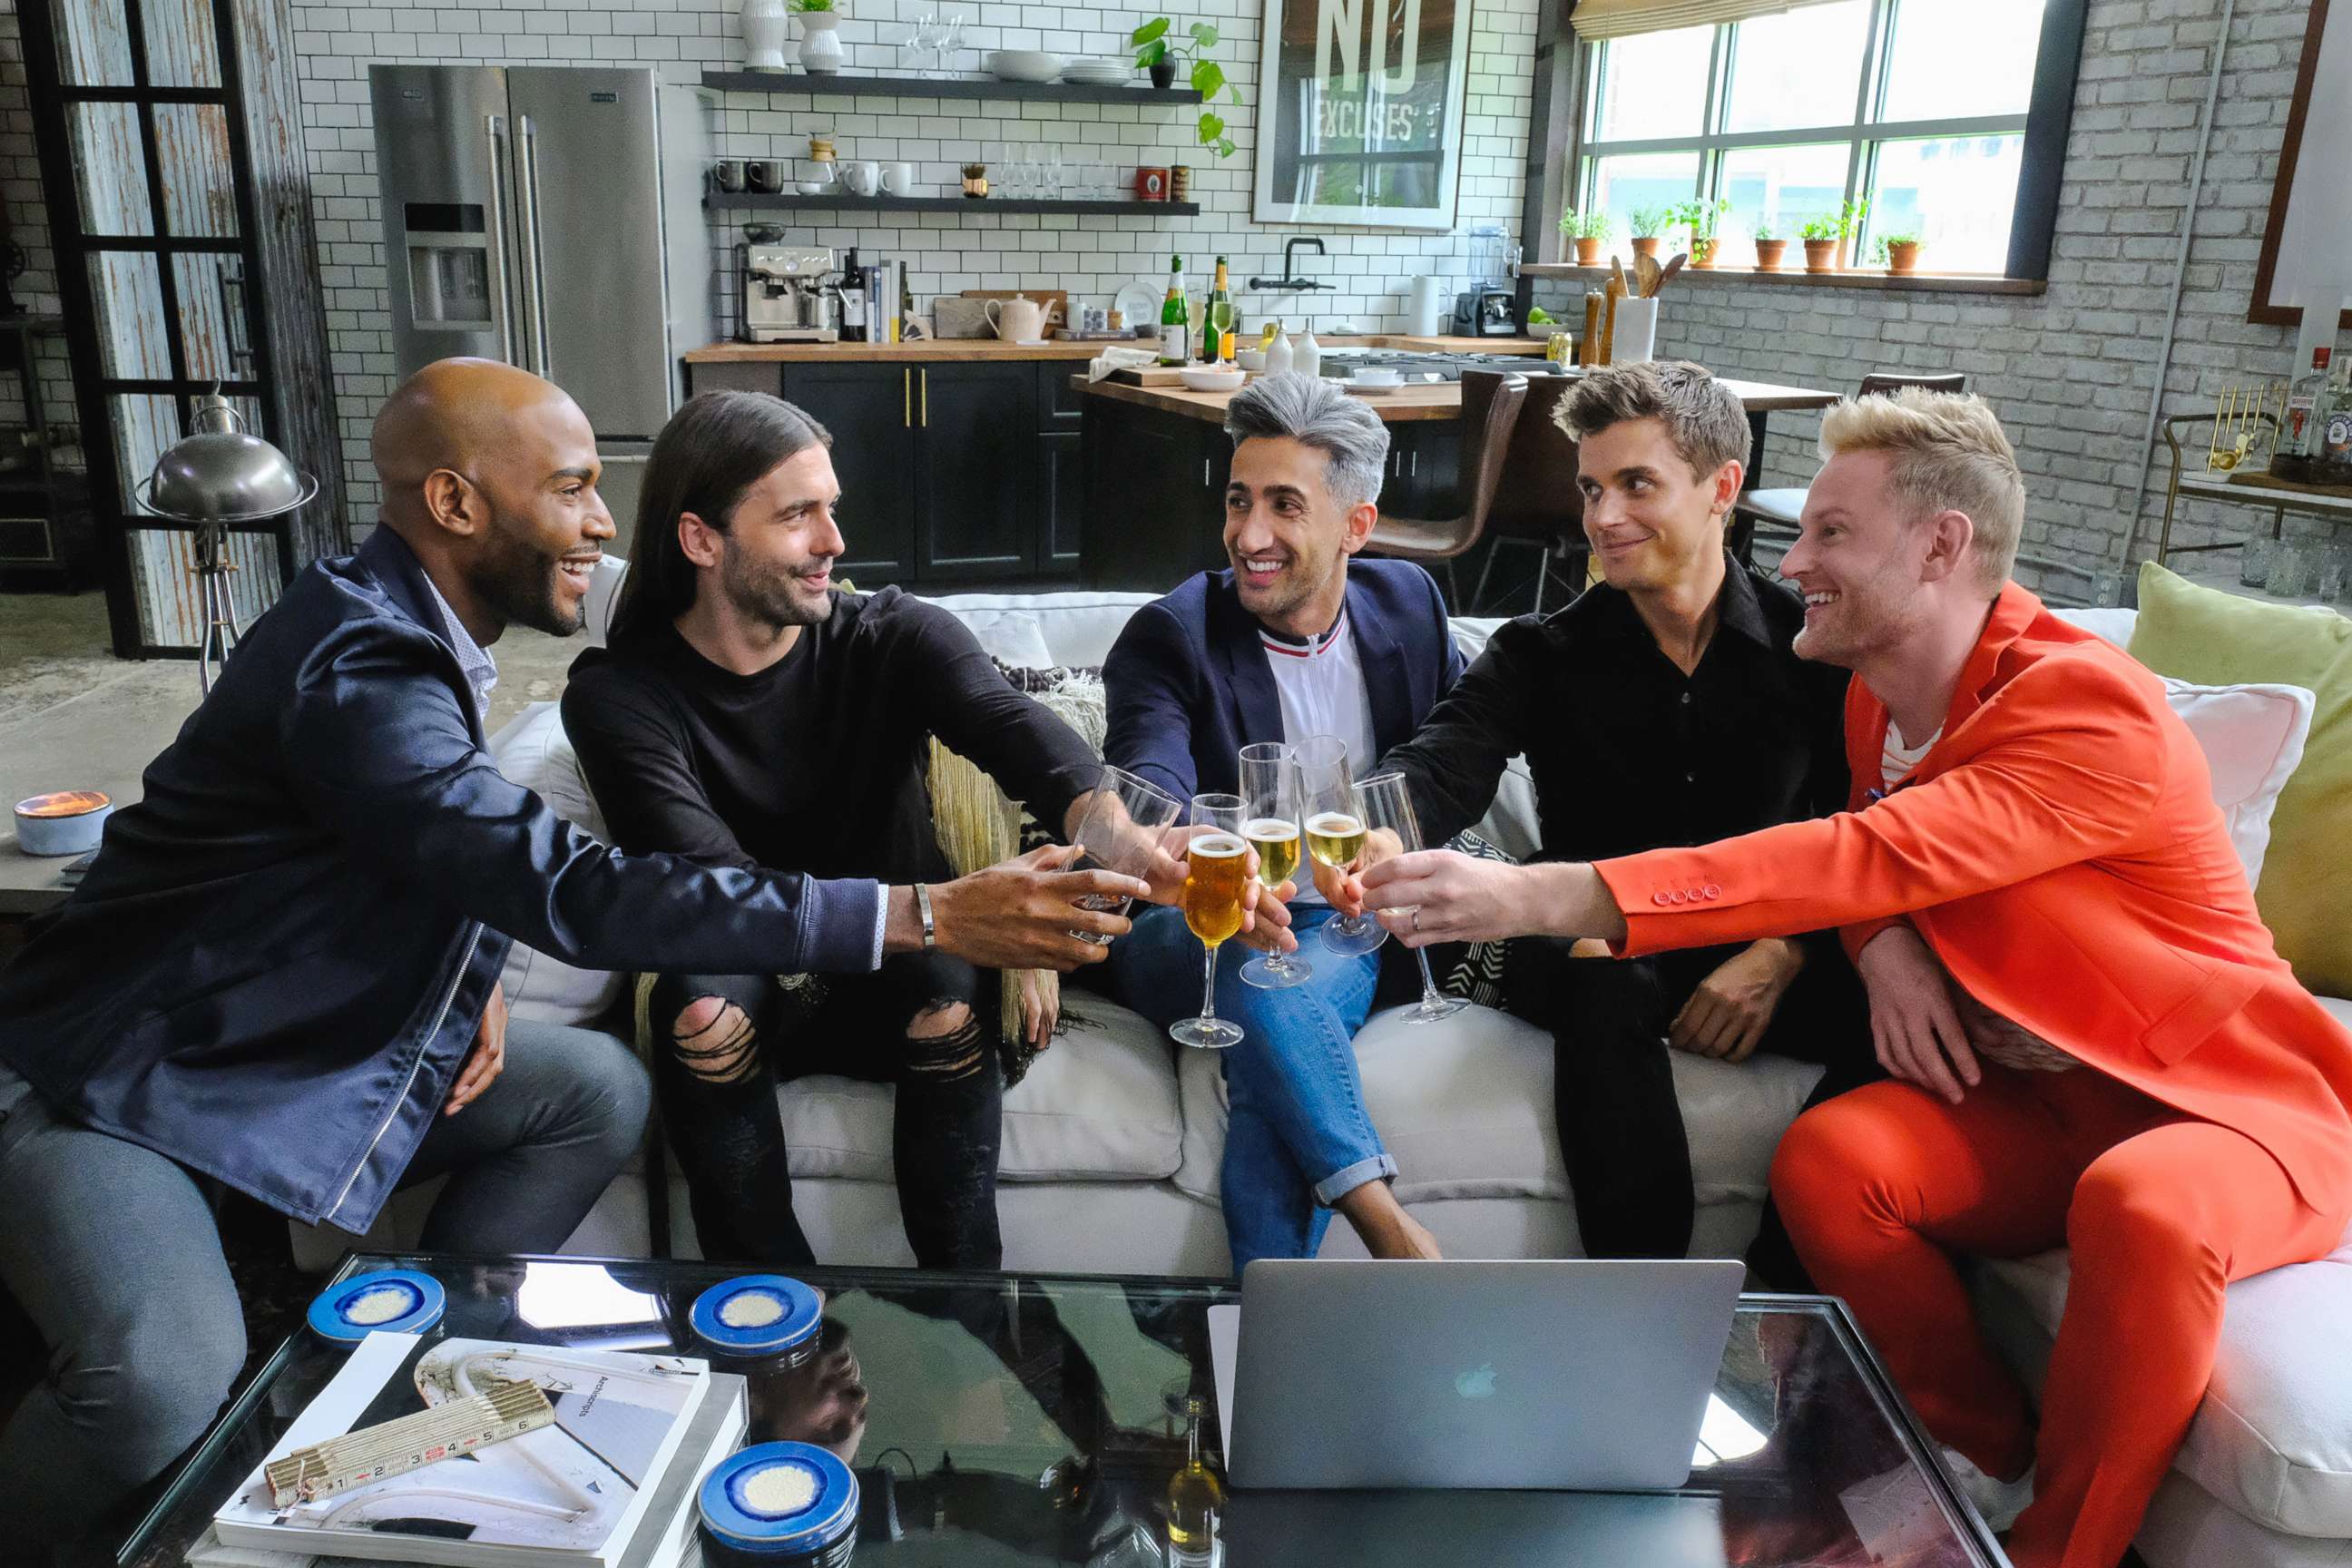 PHOTO: A production still for "Queer Eye for the Straight Guy" is seen here. 